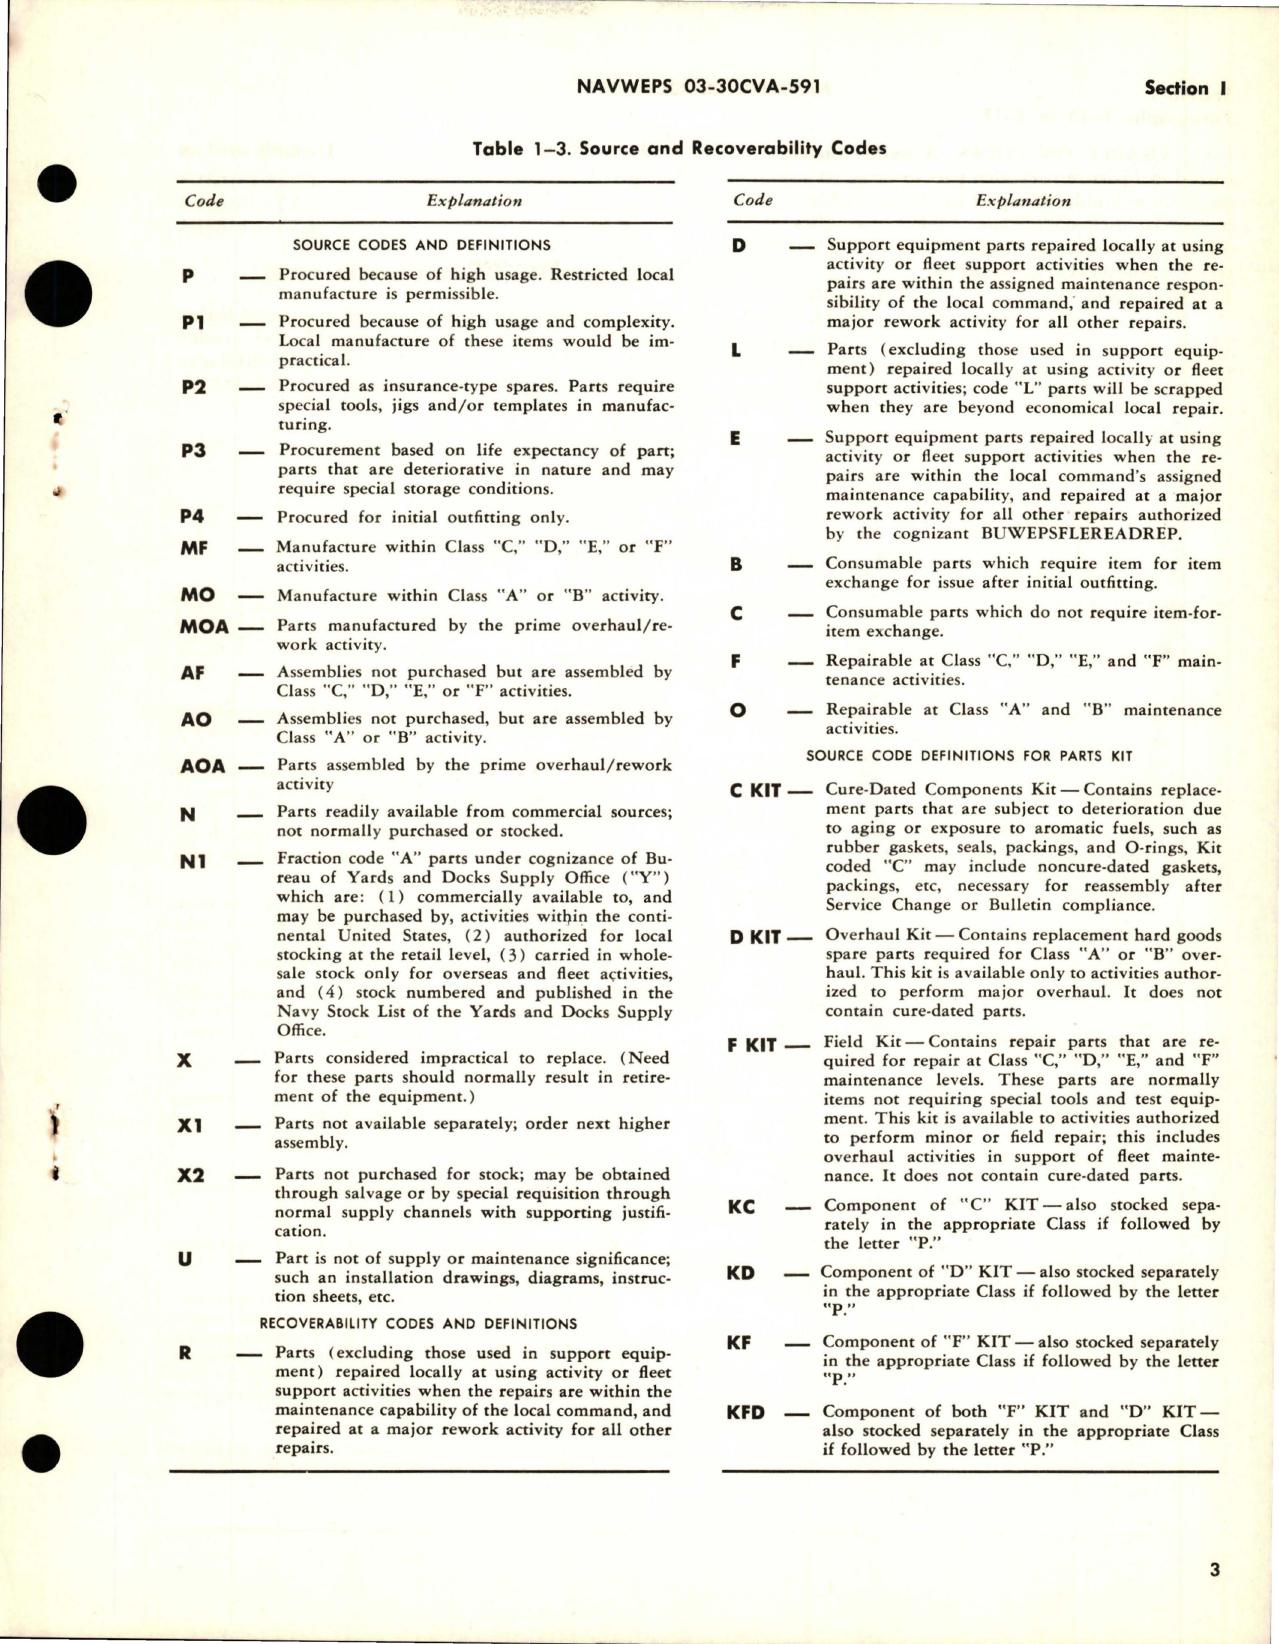 Sample page 5 from AirCorps Library document: Illustrated Parts Breakdown for Yaw Trim and Damper Cylinder Assemblies - Parts CV15-151049-1, CV15-151049-2, CV15-151049-3, and CV15-151049-4